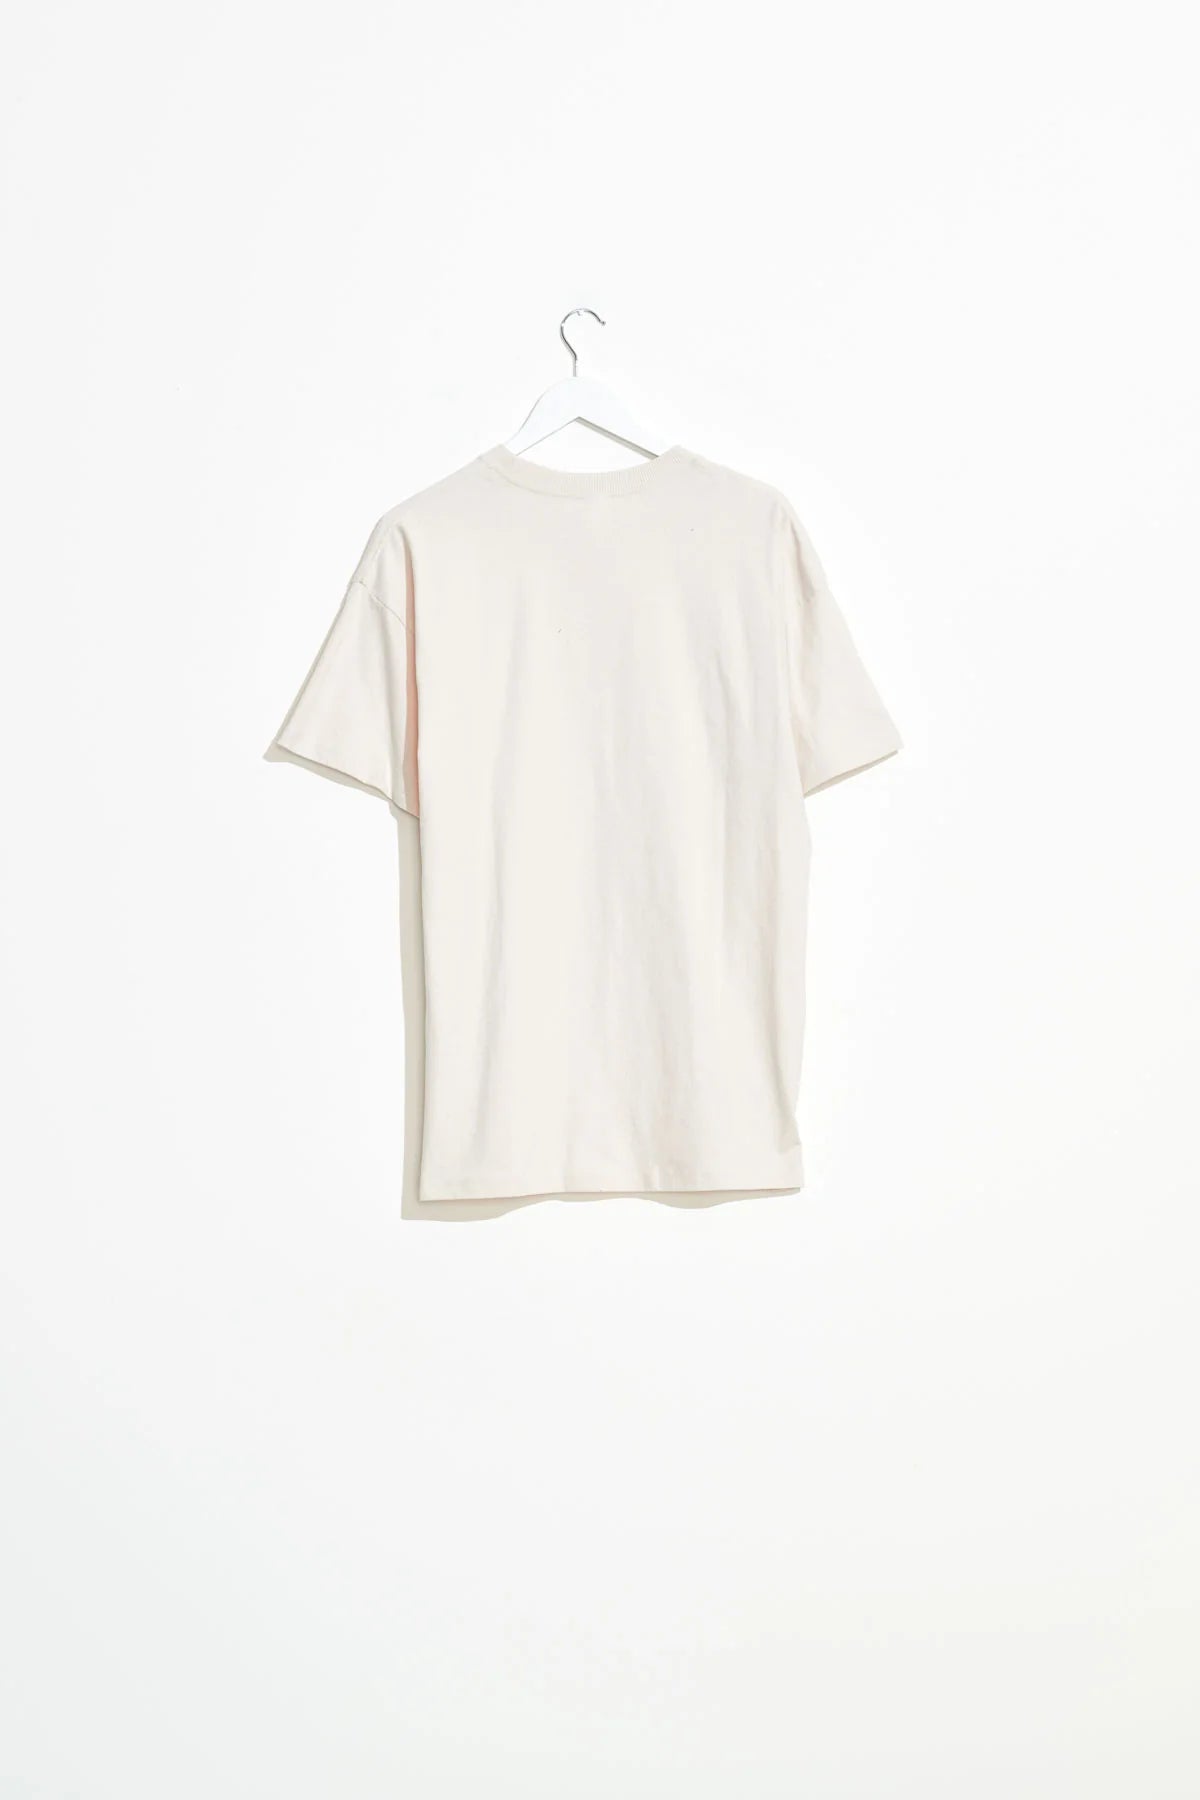 MISFIT // Supercorporate 2.0 SS Tee THRIFT WHITE